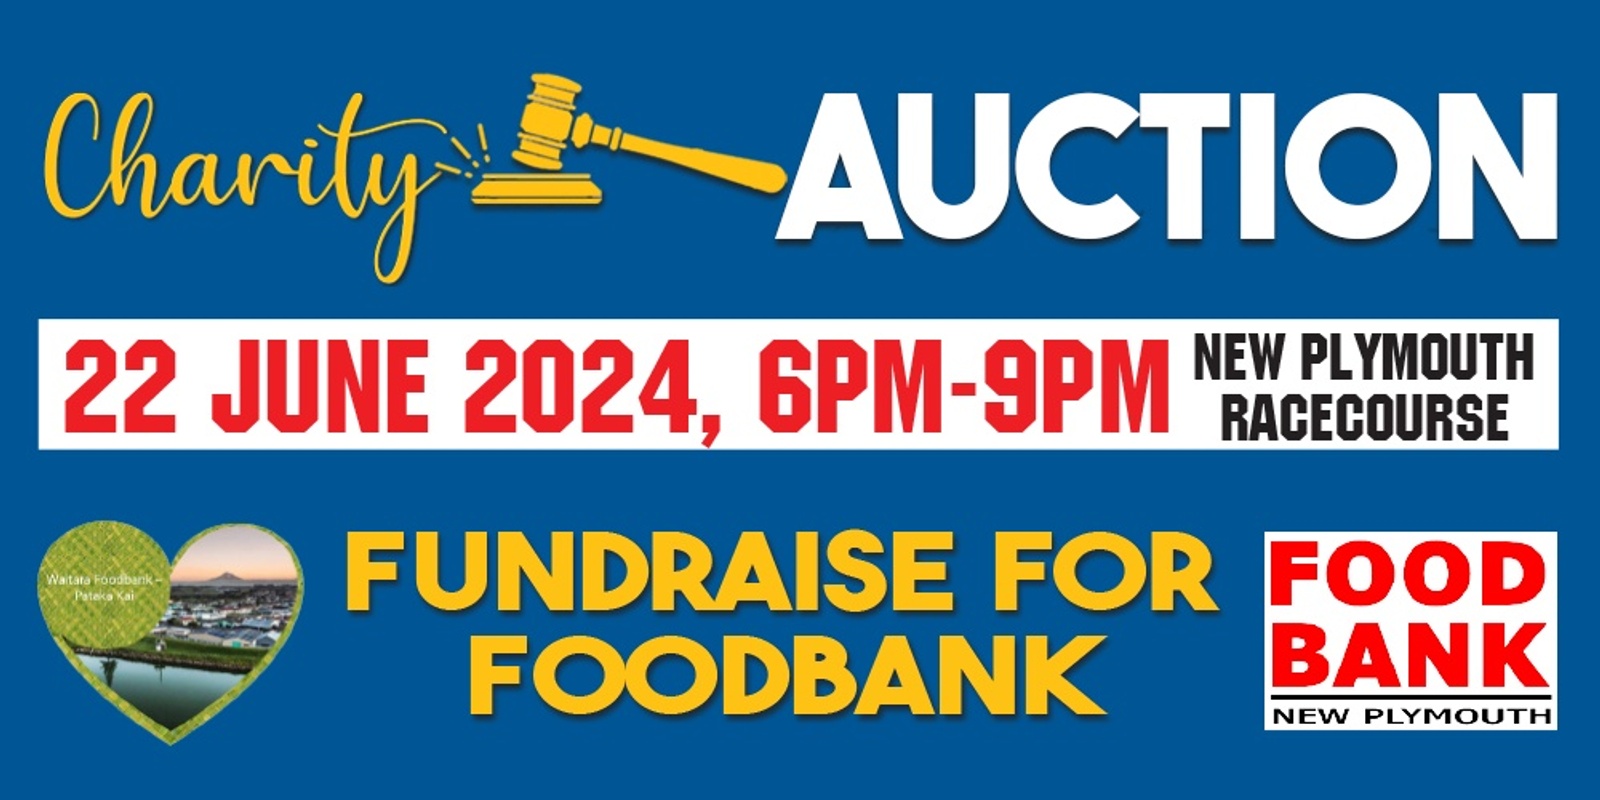 Banner image for Fund Raise for Foodbank - Charity Auction